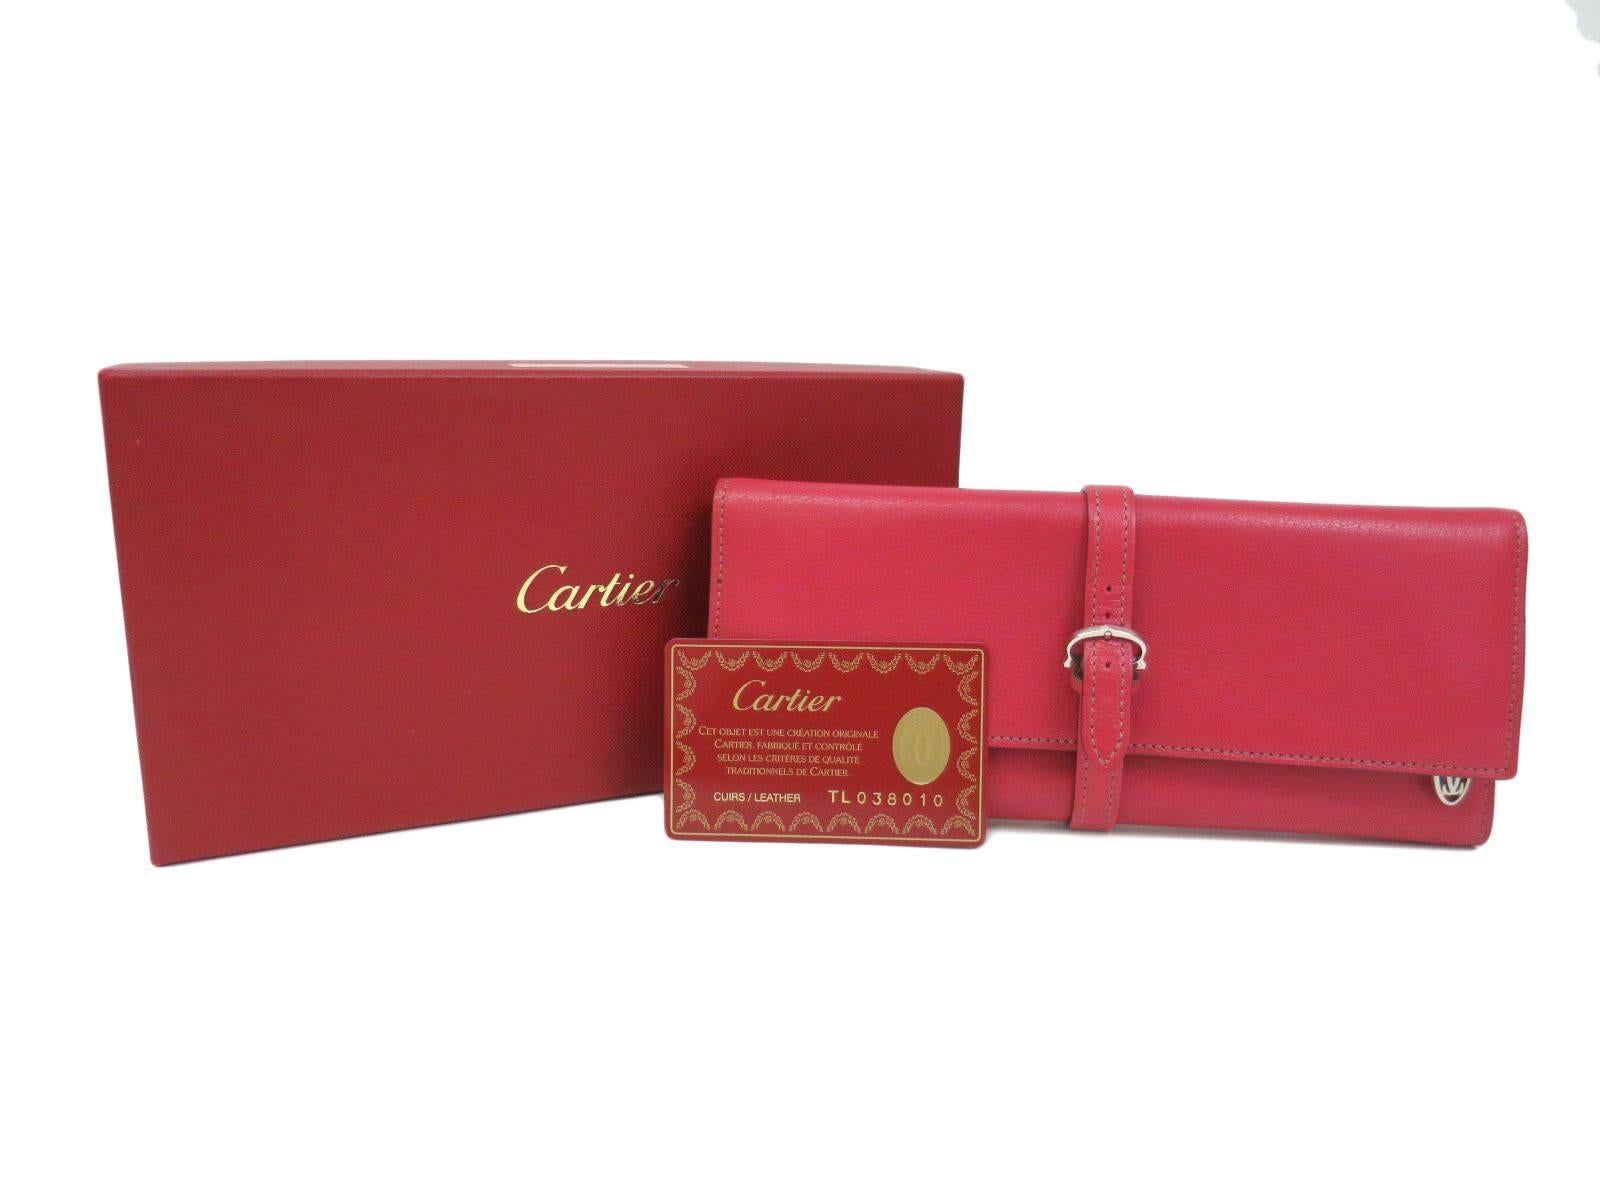 Cartier NEW Pink Leather Jewelry Vanity Travel Storage Clutch Case Bag in Box 1